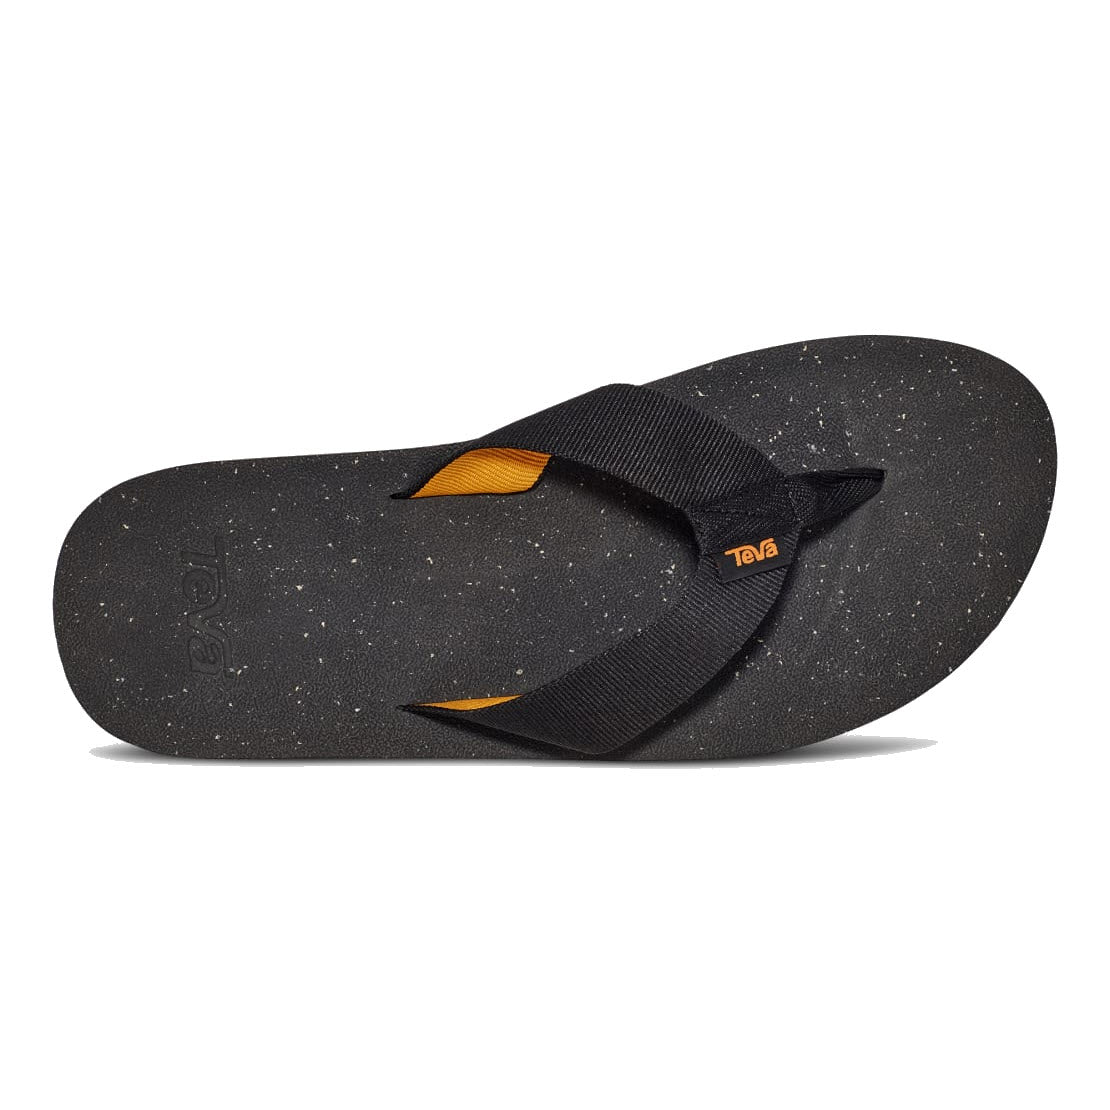 A single black sustainably minded flip-flop with a speckled footbed and textured straps featuring an orange logo, crafted with recycled content, the Teva TEVA REFLIP BLACK - MENS.